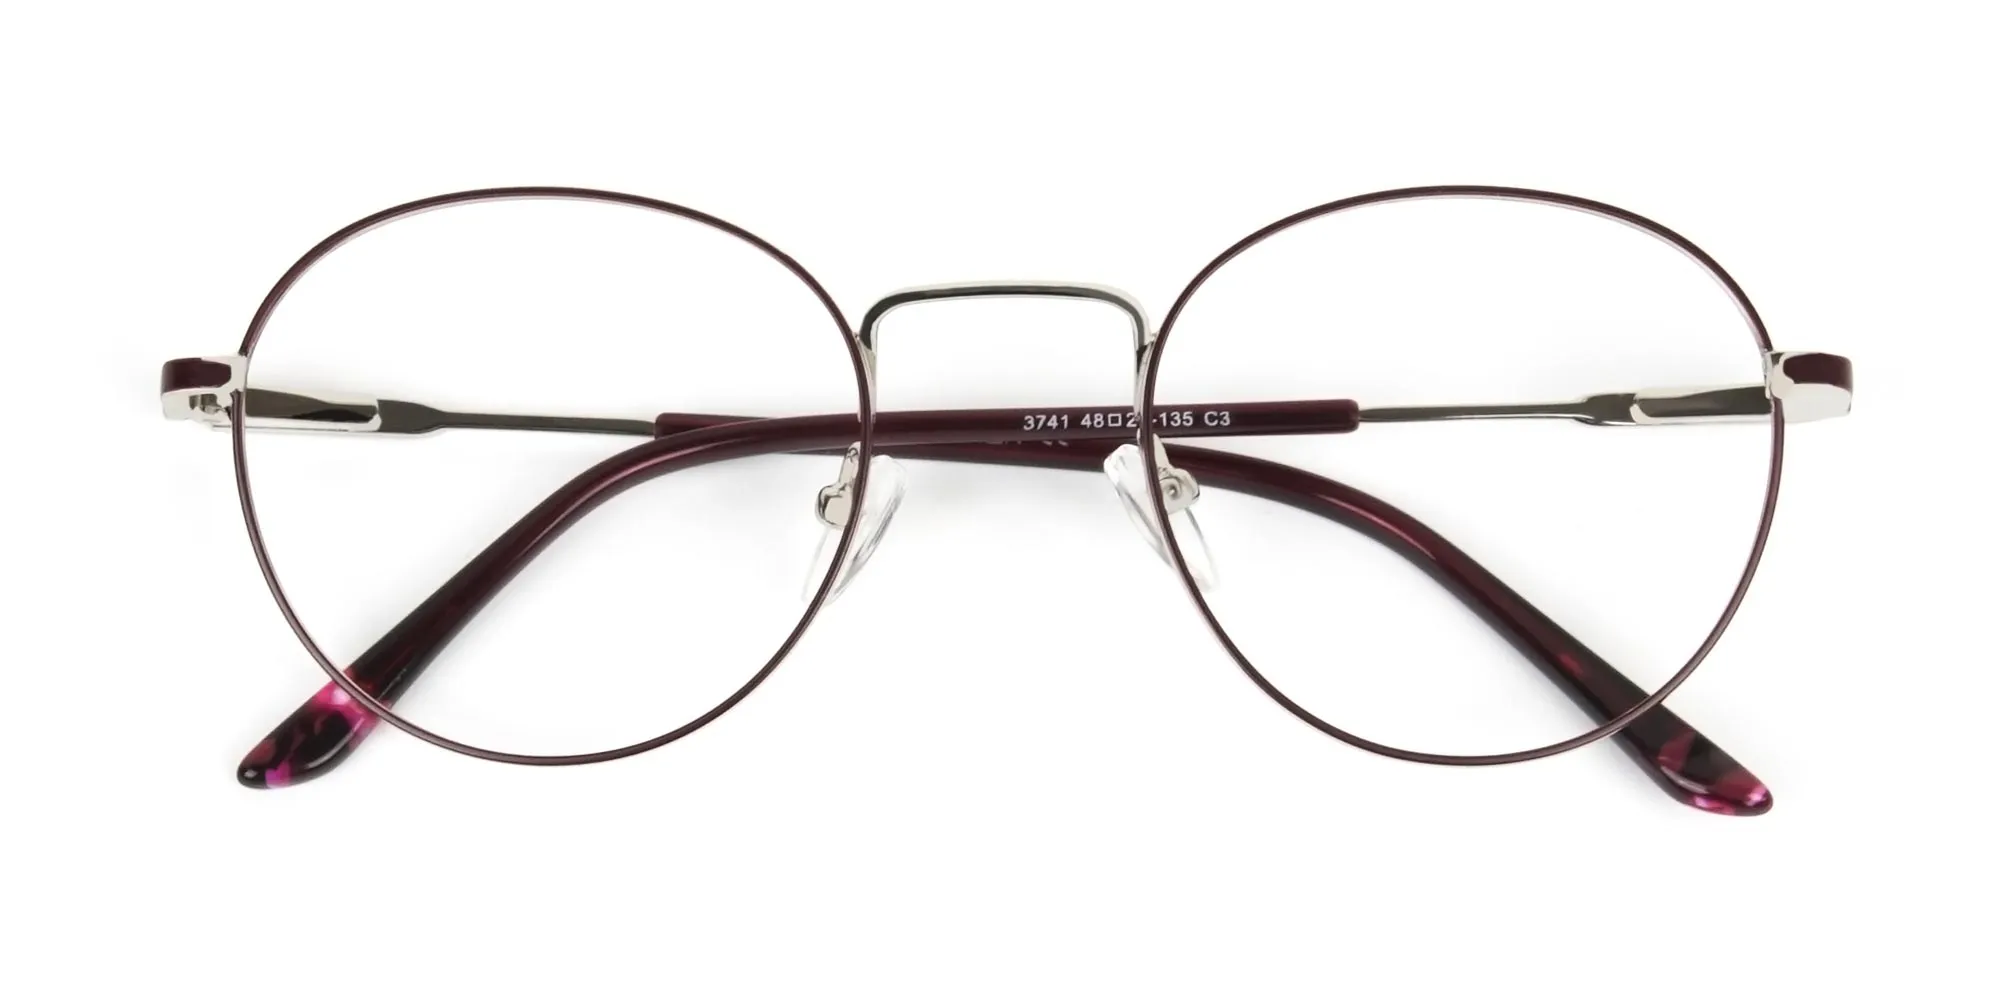 Silver, Burgundy & Purple Round Spectacles - 2